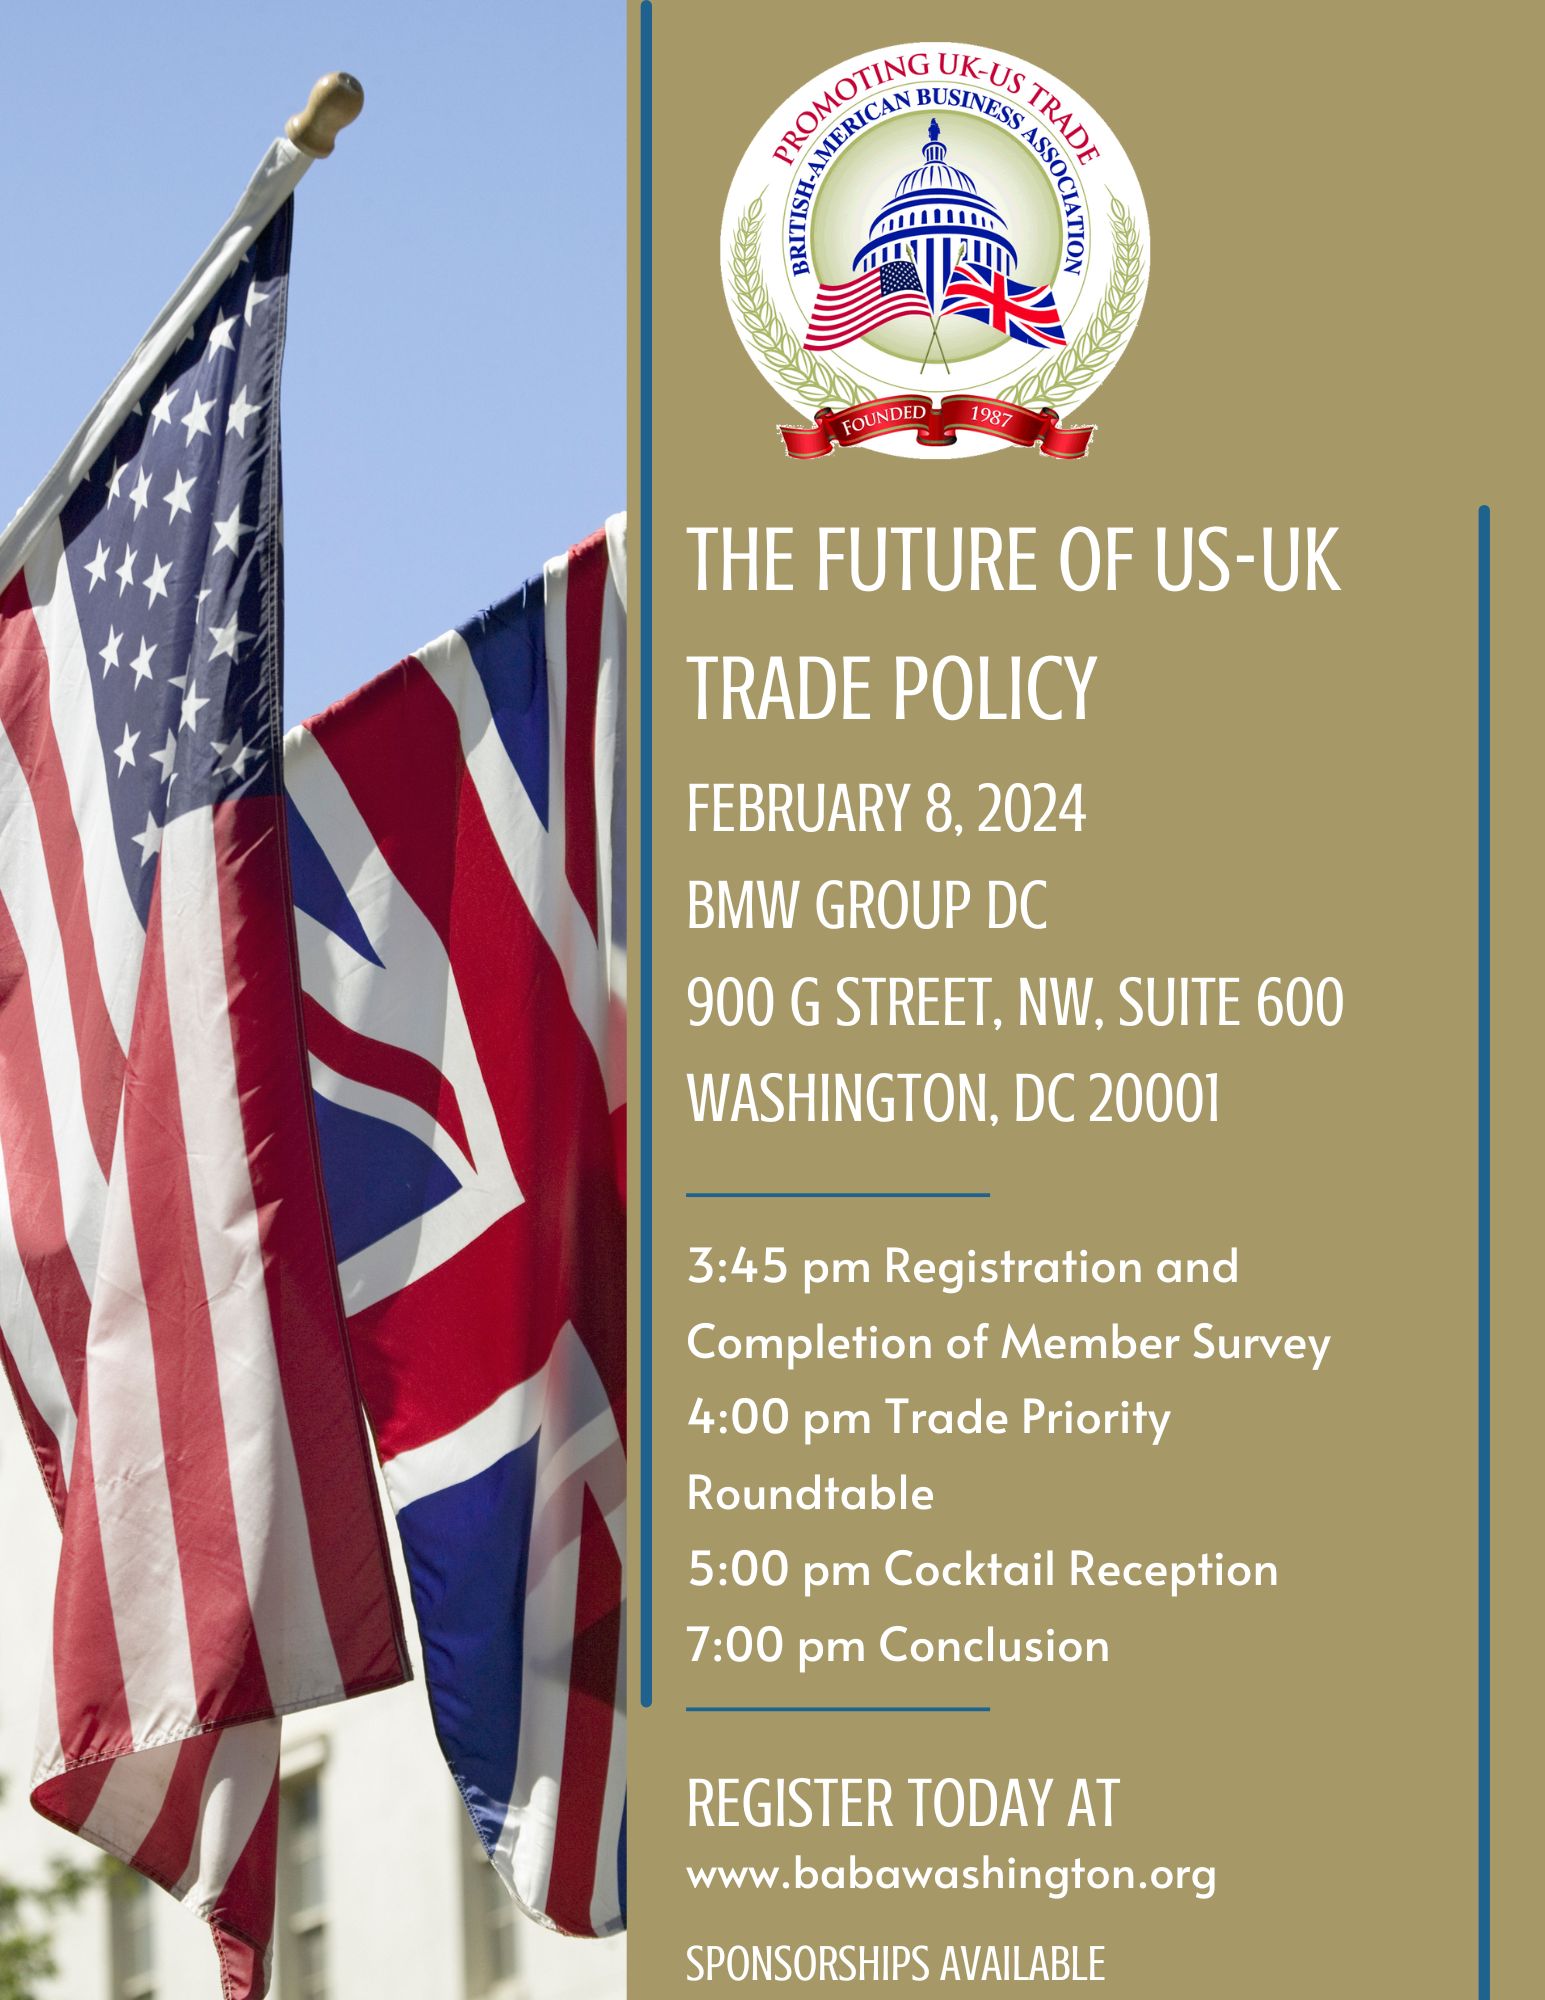 The Future of US-UK Trade Policy